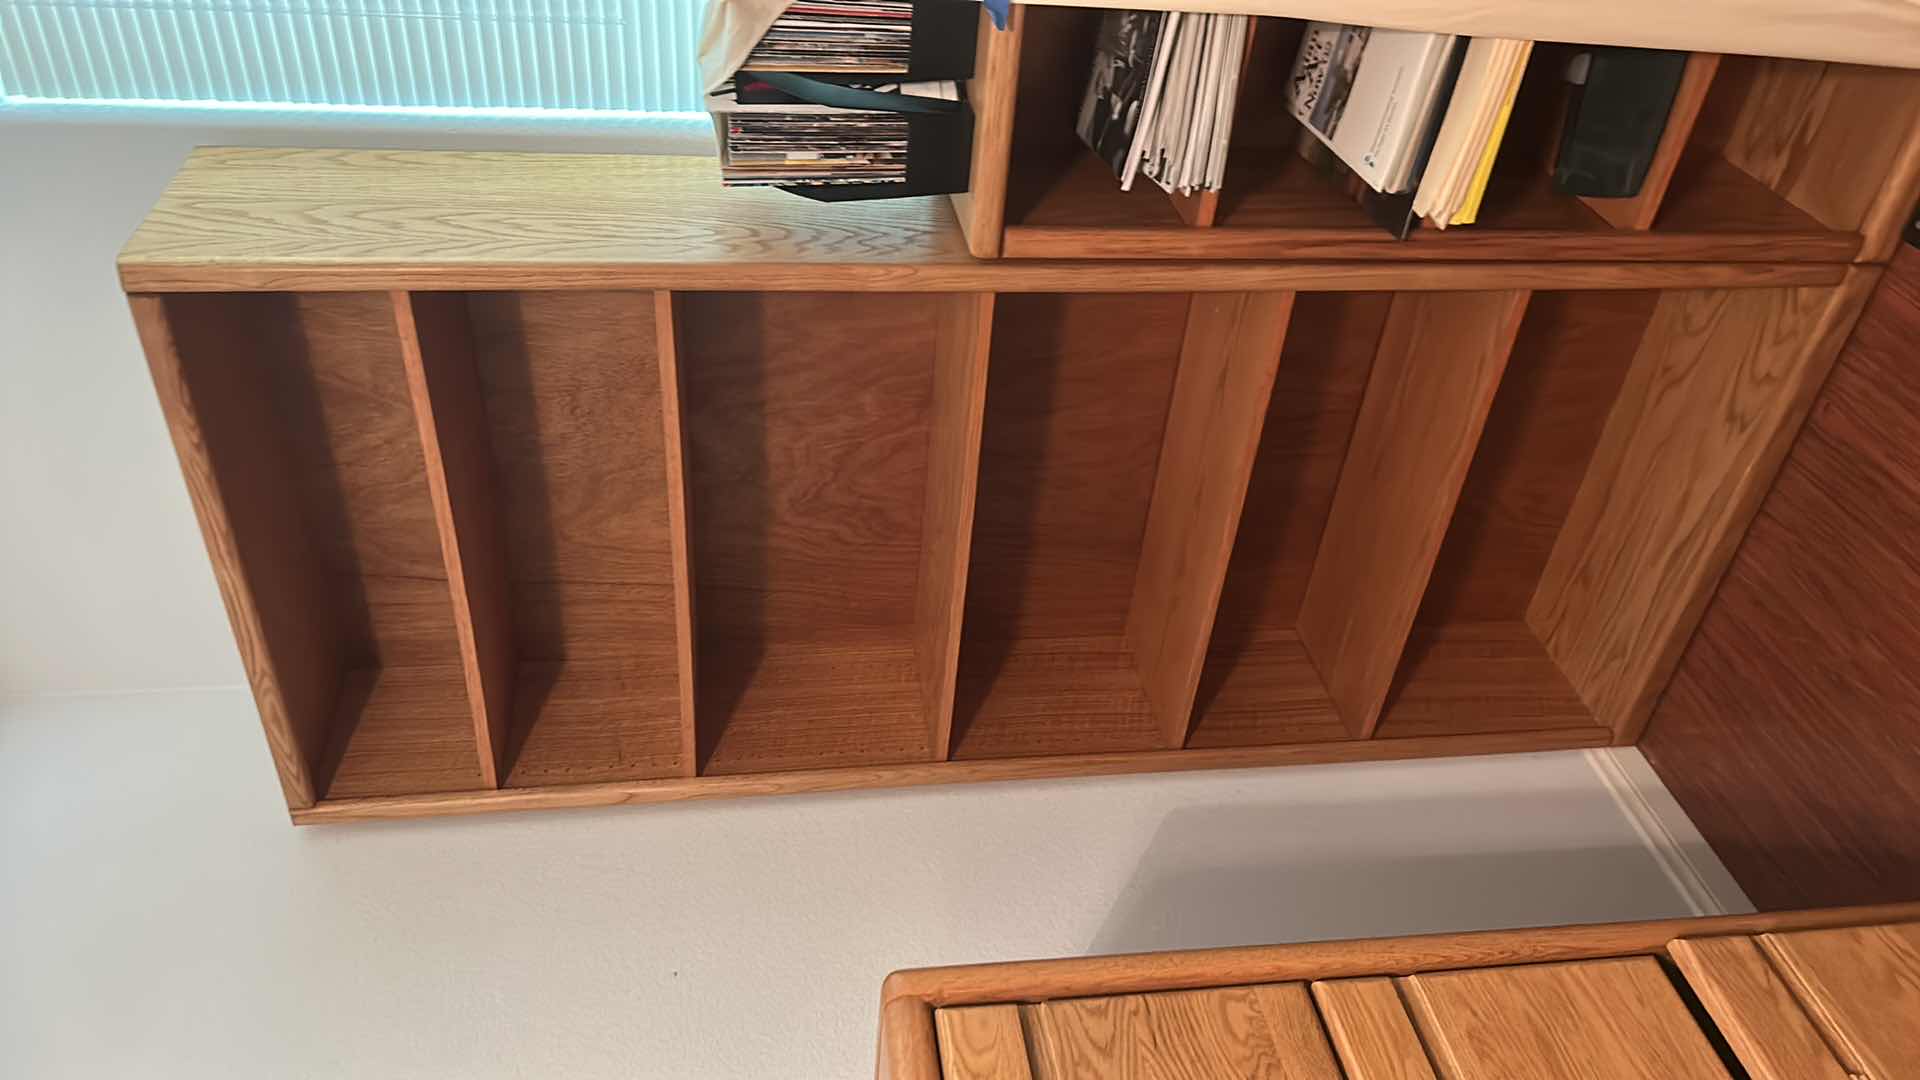 Photo 4 of TALL WOOD BOOK SHELVES (ADJUSTABLE) 35” x 13” x H7’